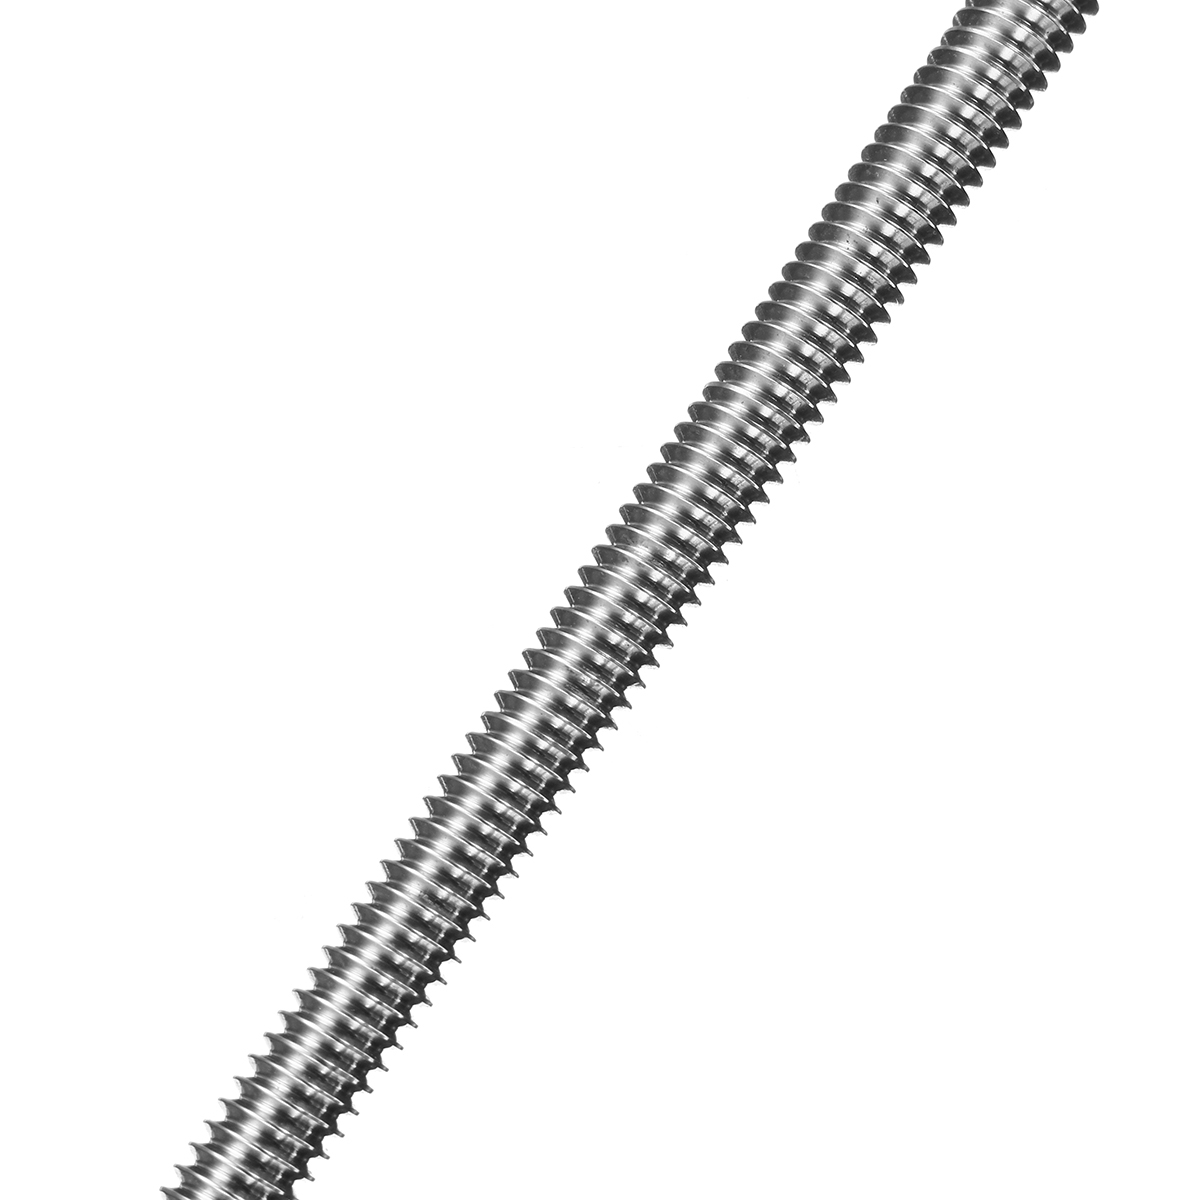 10quot-Long-Threaded-End-Fitting-Swage-Stud-Rigging-Terminals-for-18quot-Cable-Railing-Rail-1310903-5